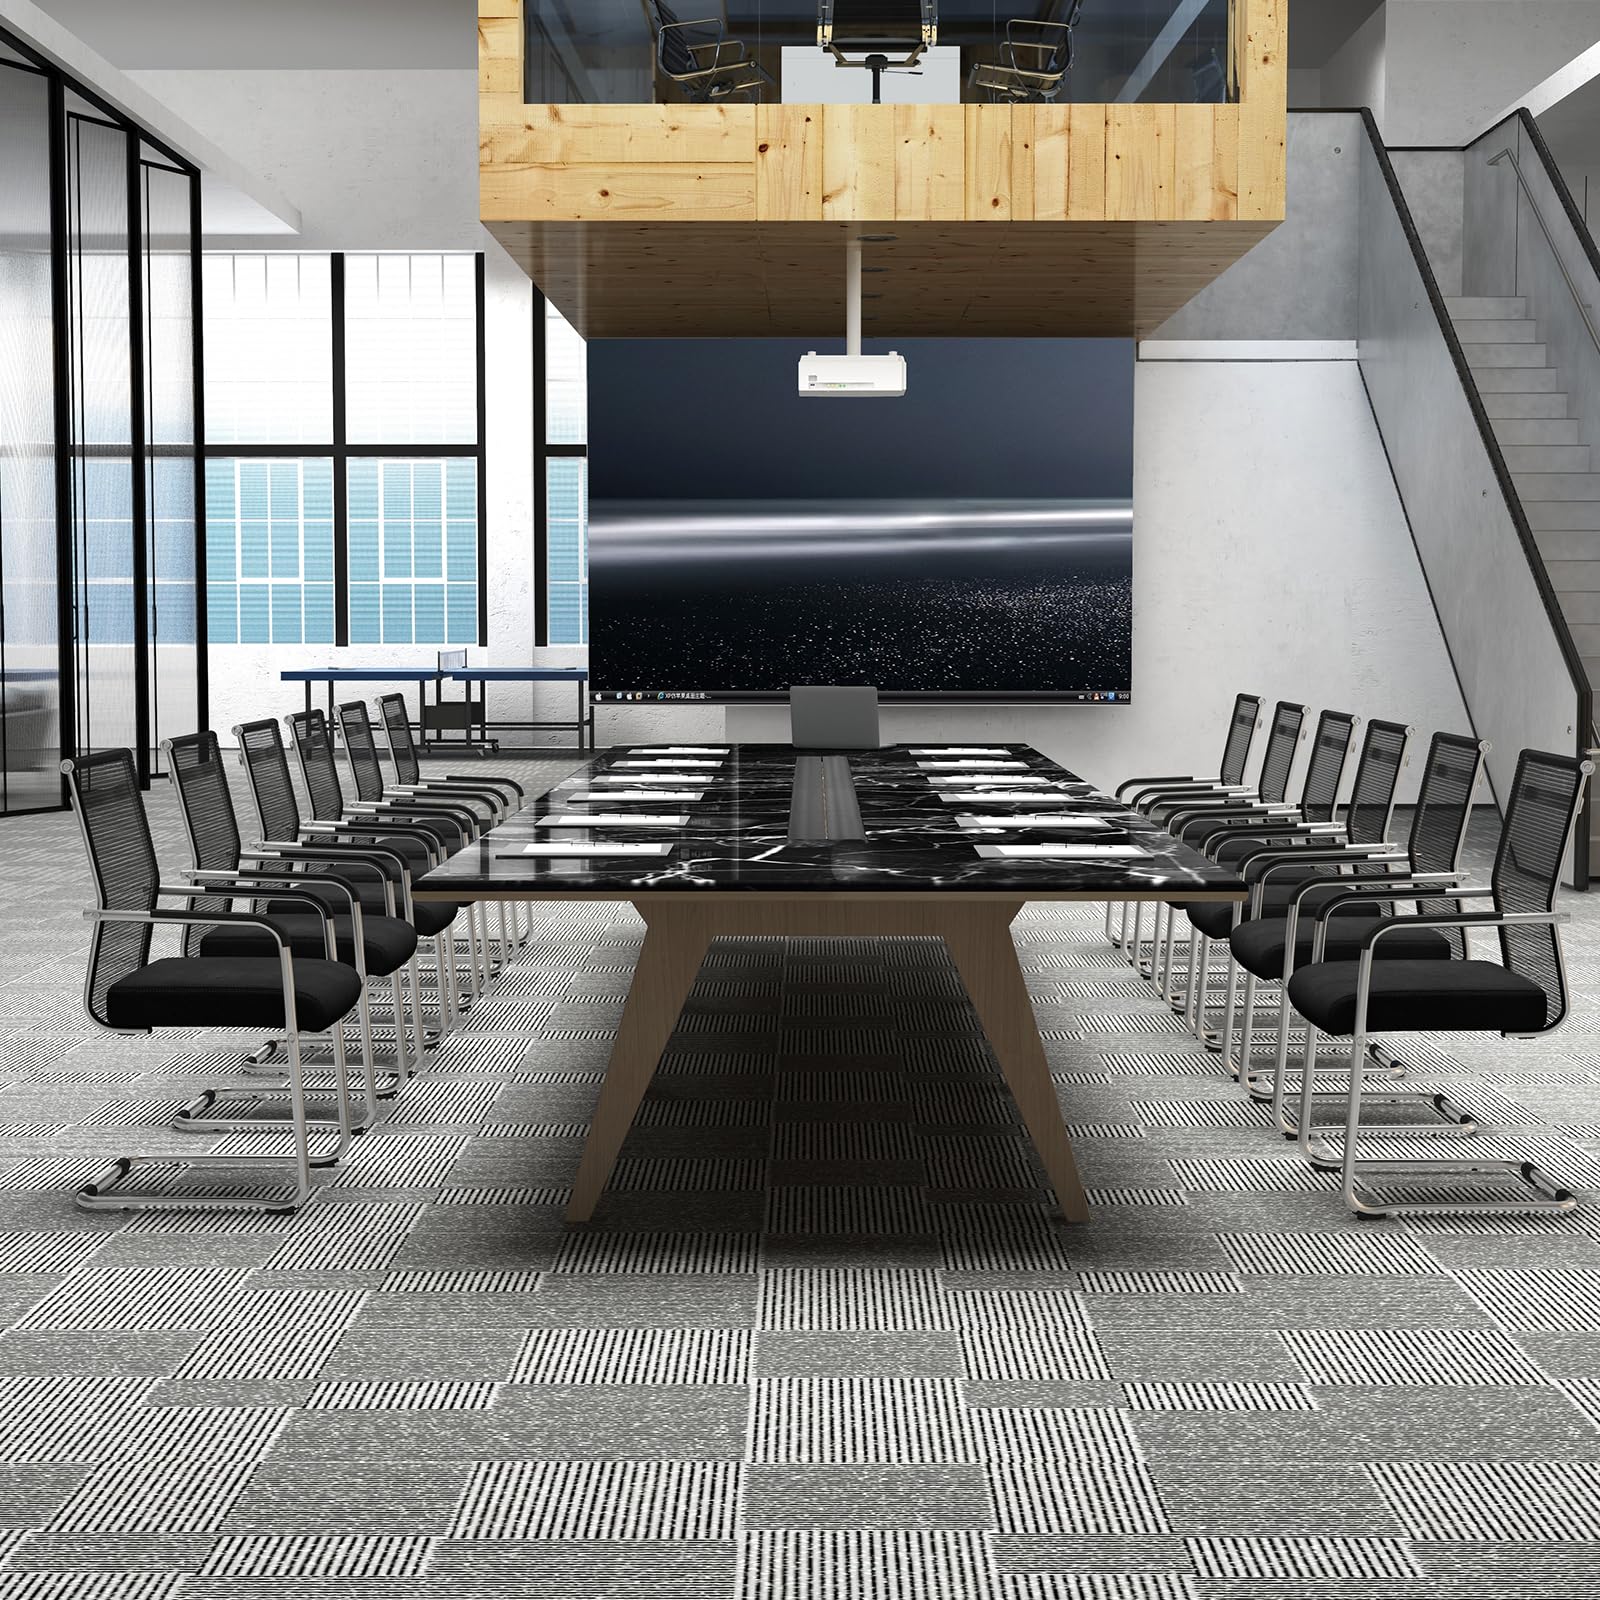 Giantex Waiting Room Chairs, Office Guest Chairs, Lobby Chairs with Metal Sled Base & Armrests